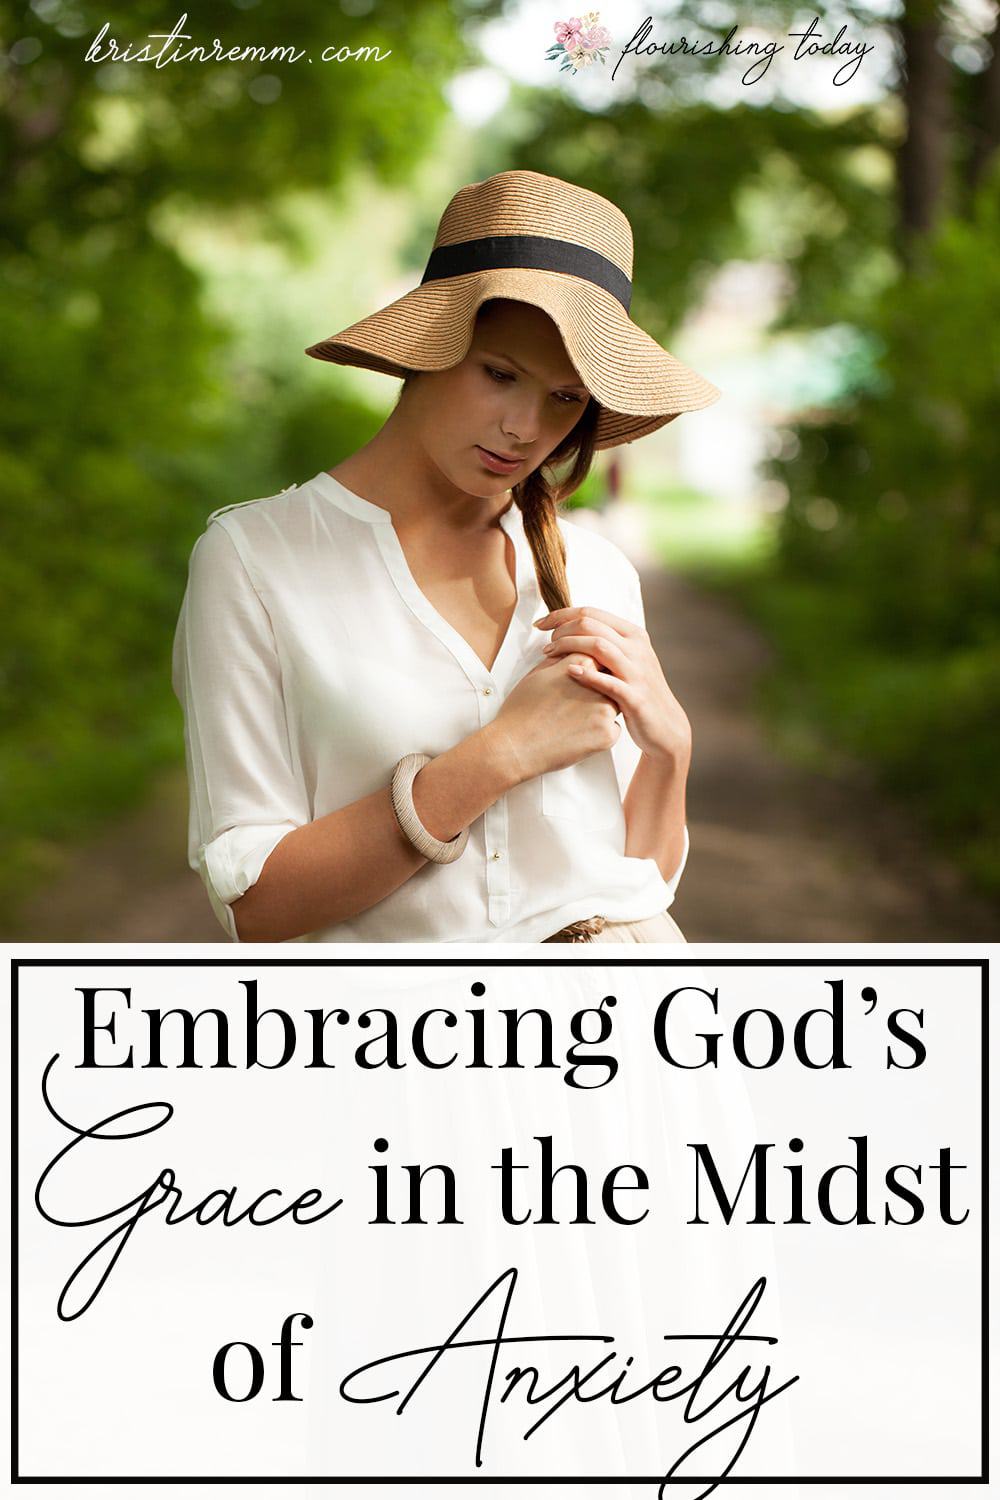 Are you in a hard place right now? Do you feel overwhelmed by despair? Here are a few tips for embracing grace from God when you're in the midst of anxiety. #anxiety #sorrow #grace #mercy #healing embracing grace god